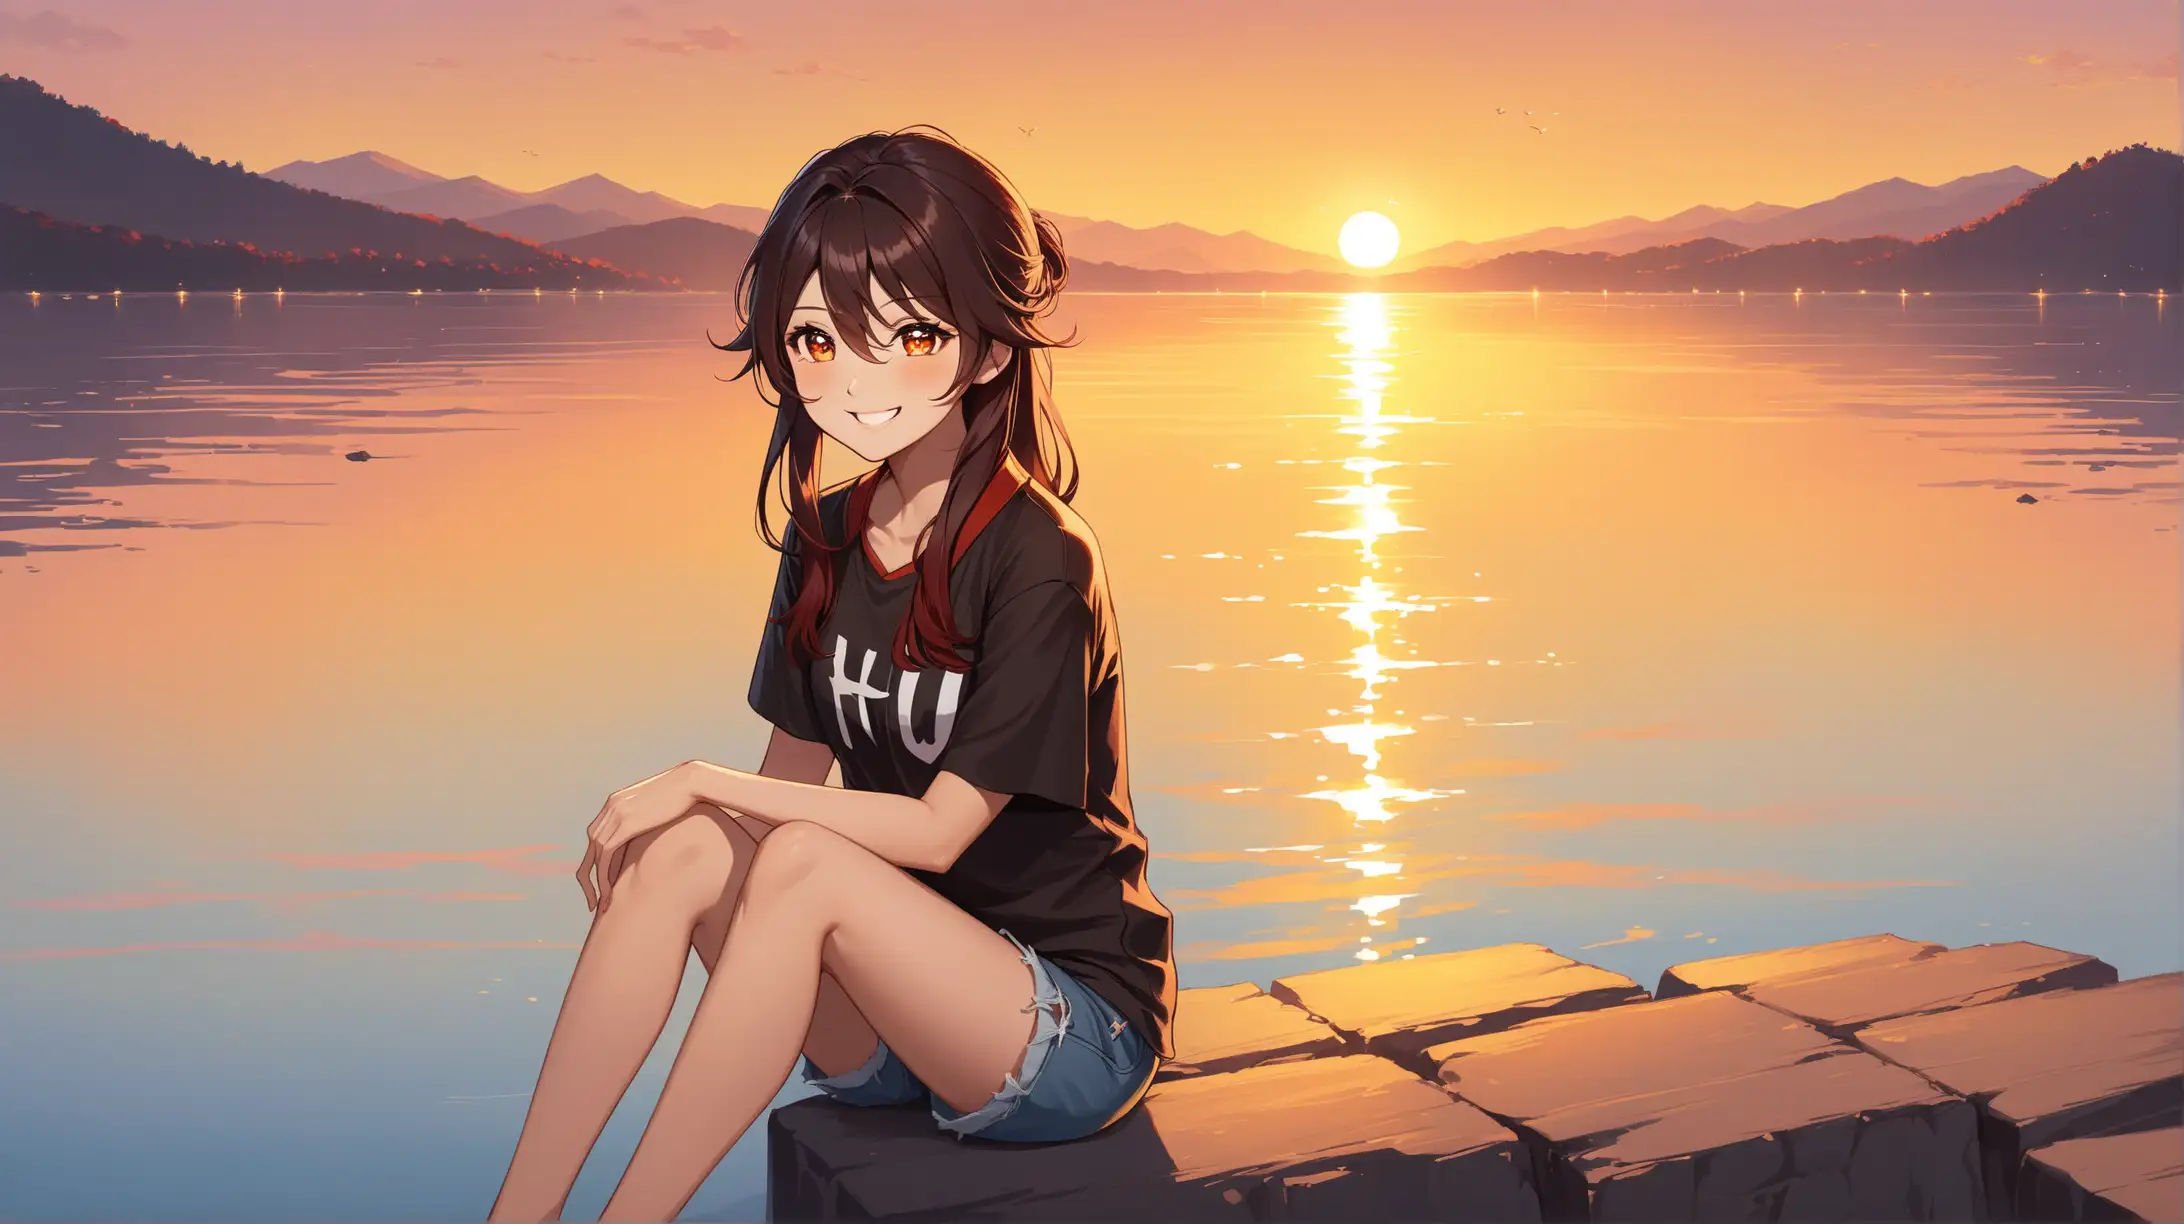 Draw the character Hu Tao, sitting in a striking pose, alone on a lakefront, at sunset, wearing shorts and a shirt, smiling at the viewer